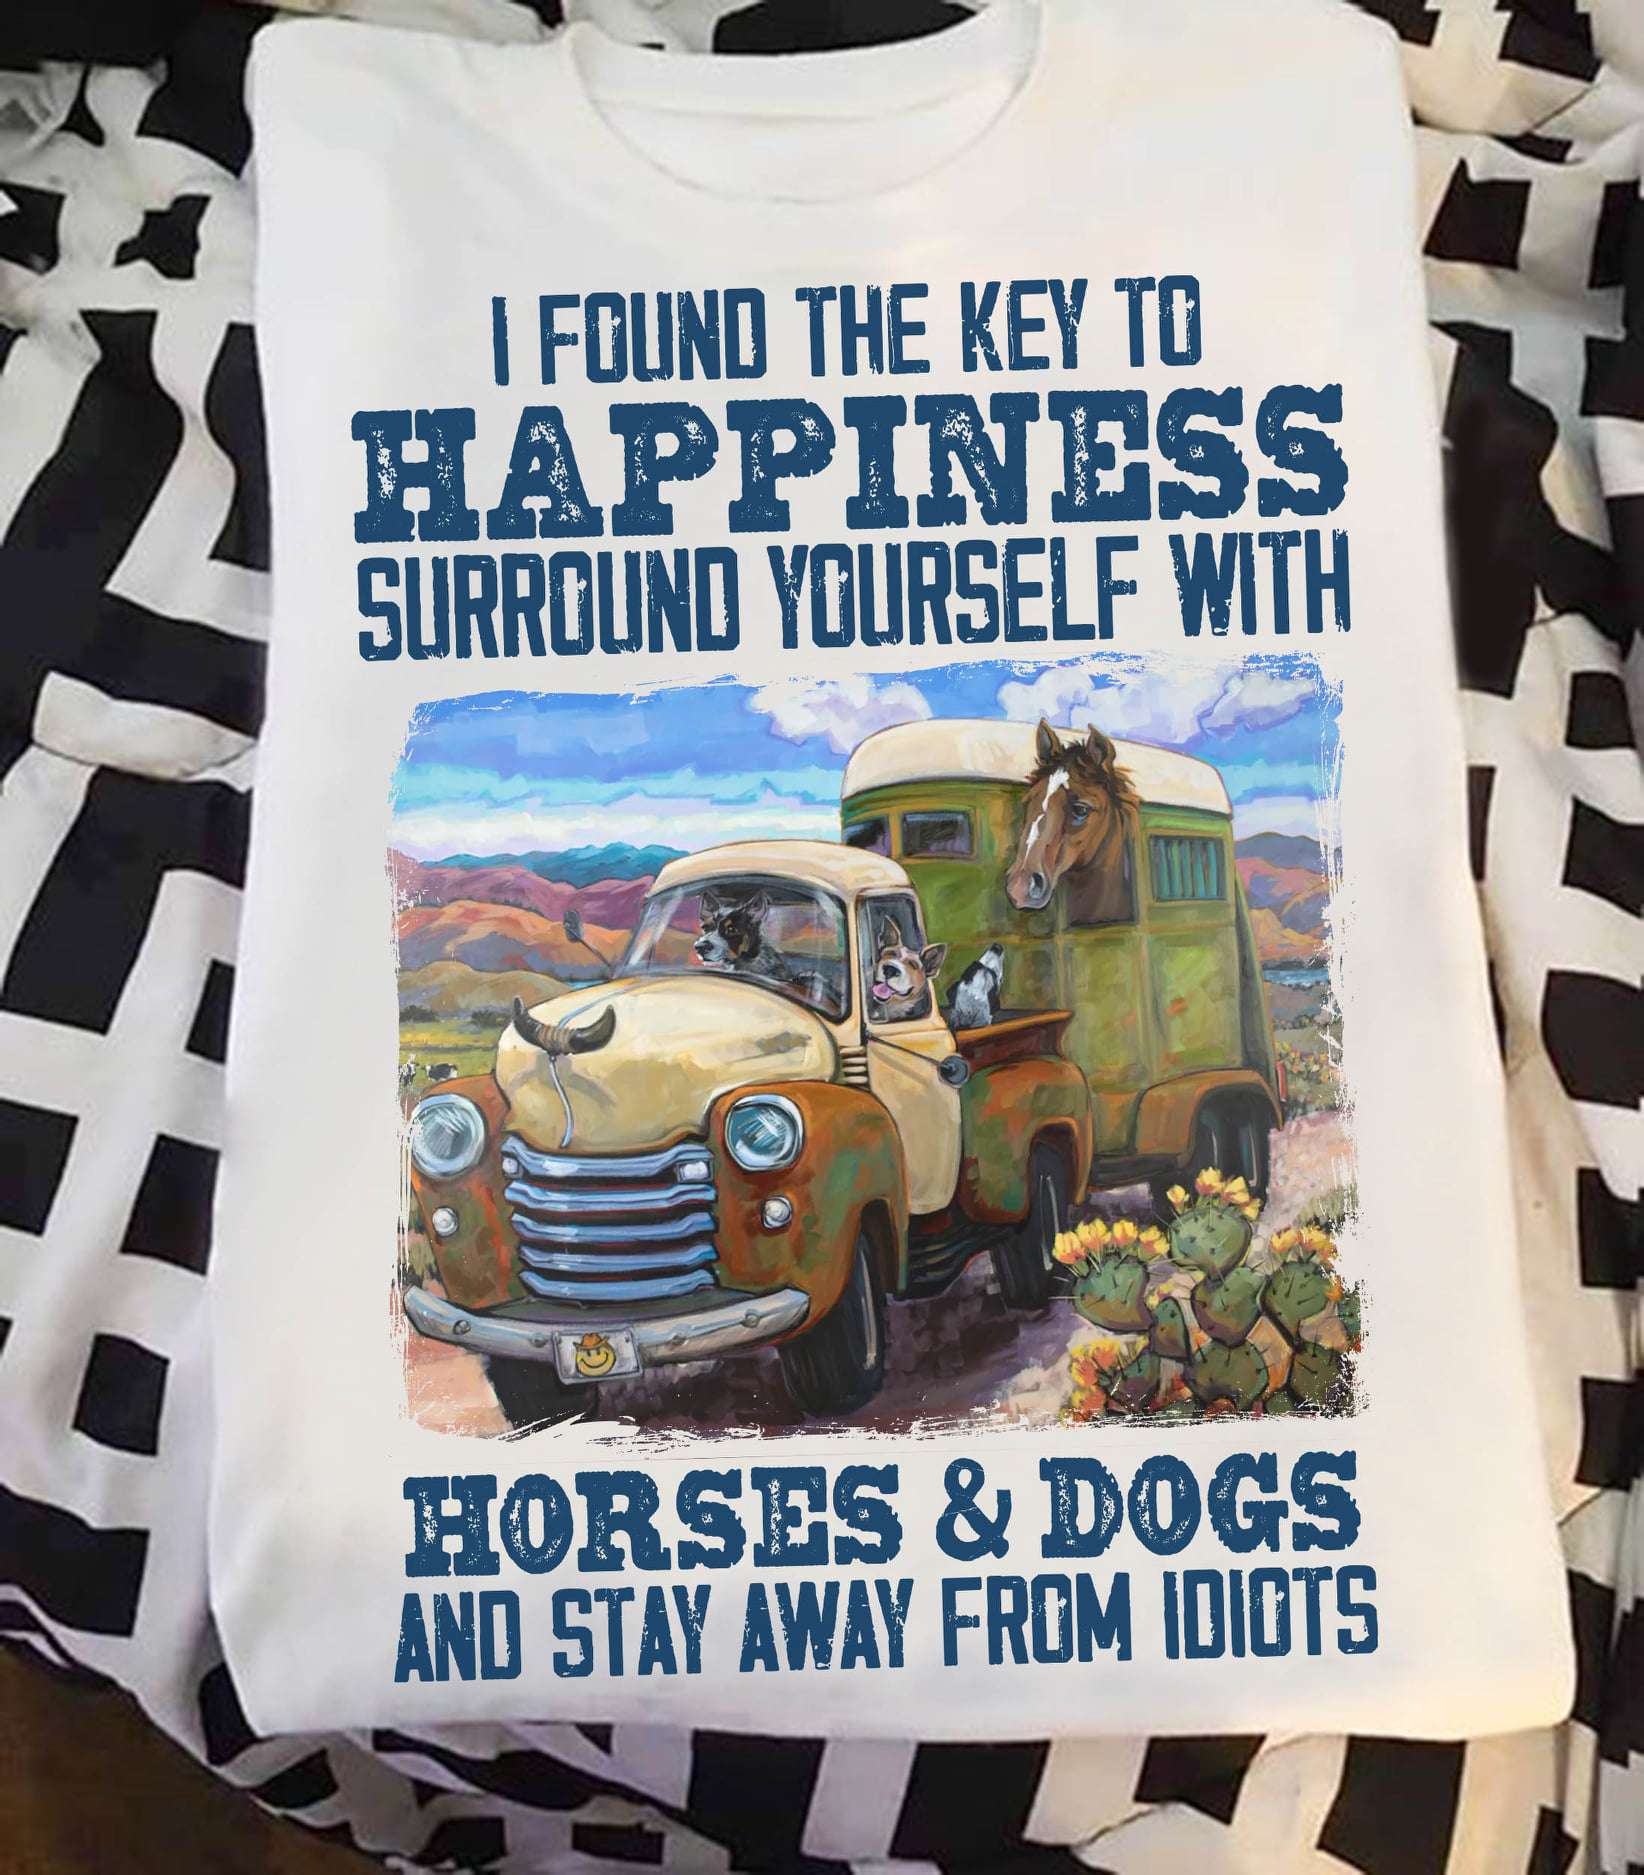 Tractor Horse Dogs - I found the key to happiness surround yourself with horses and dogs